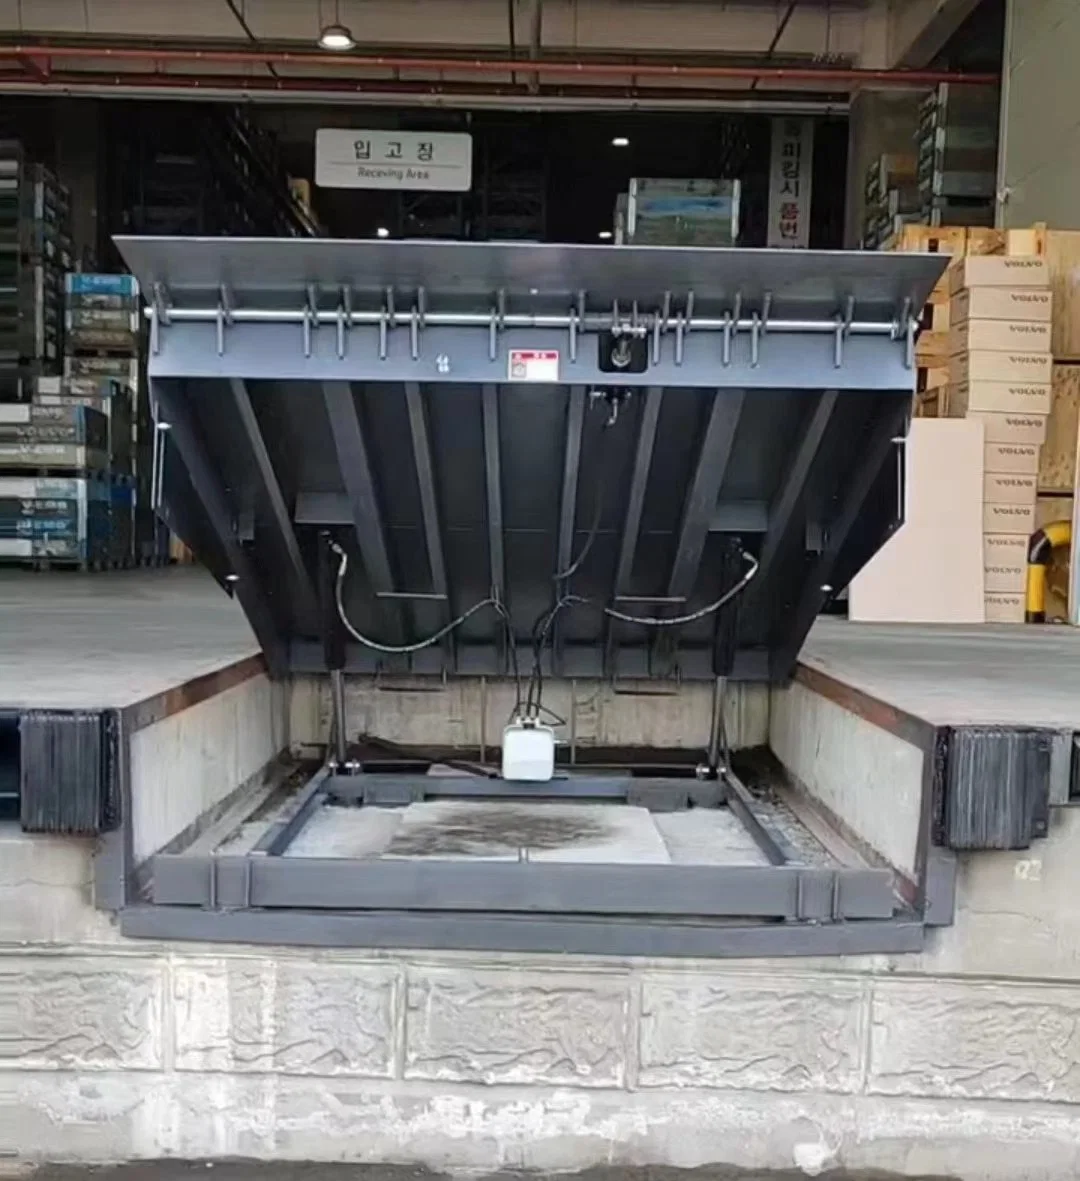 Electric Mechanical Boxed up Hydraulic Cylinder Telescoping Dock Leveler Garage Warehouse Ramp Equipment for Loading Bay